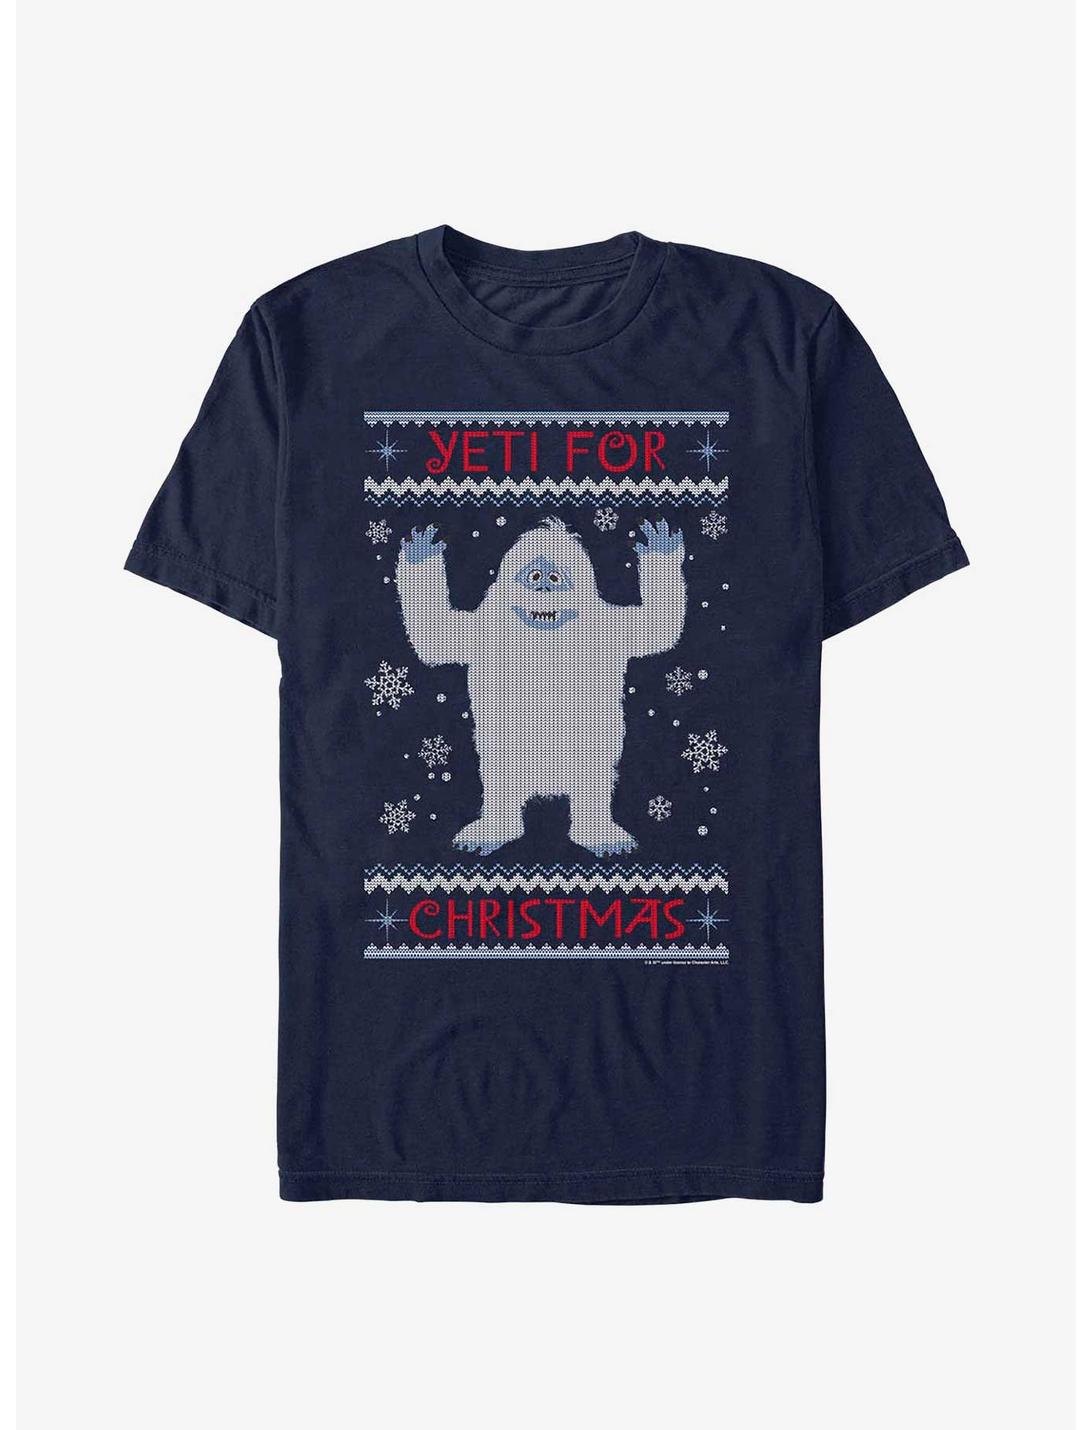 Rudolph The Red-Nosed Reindeer Yeti For Christmas Ugly Sweater T-Shirt, NAVY, hi-res